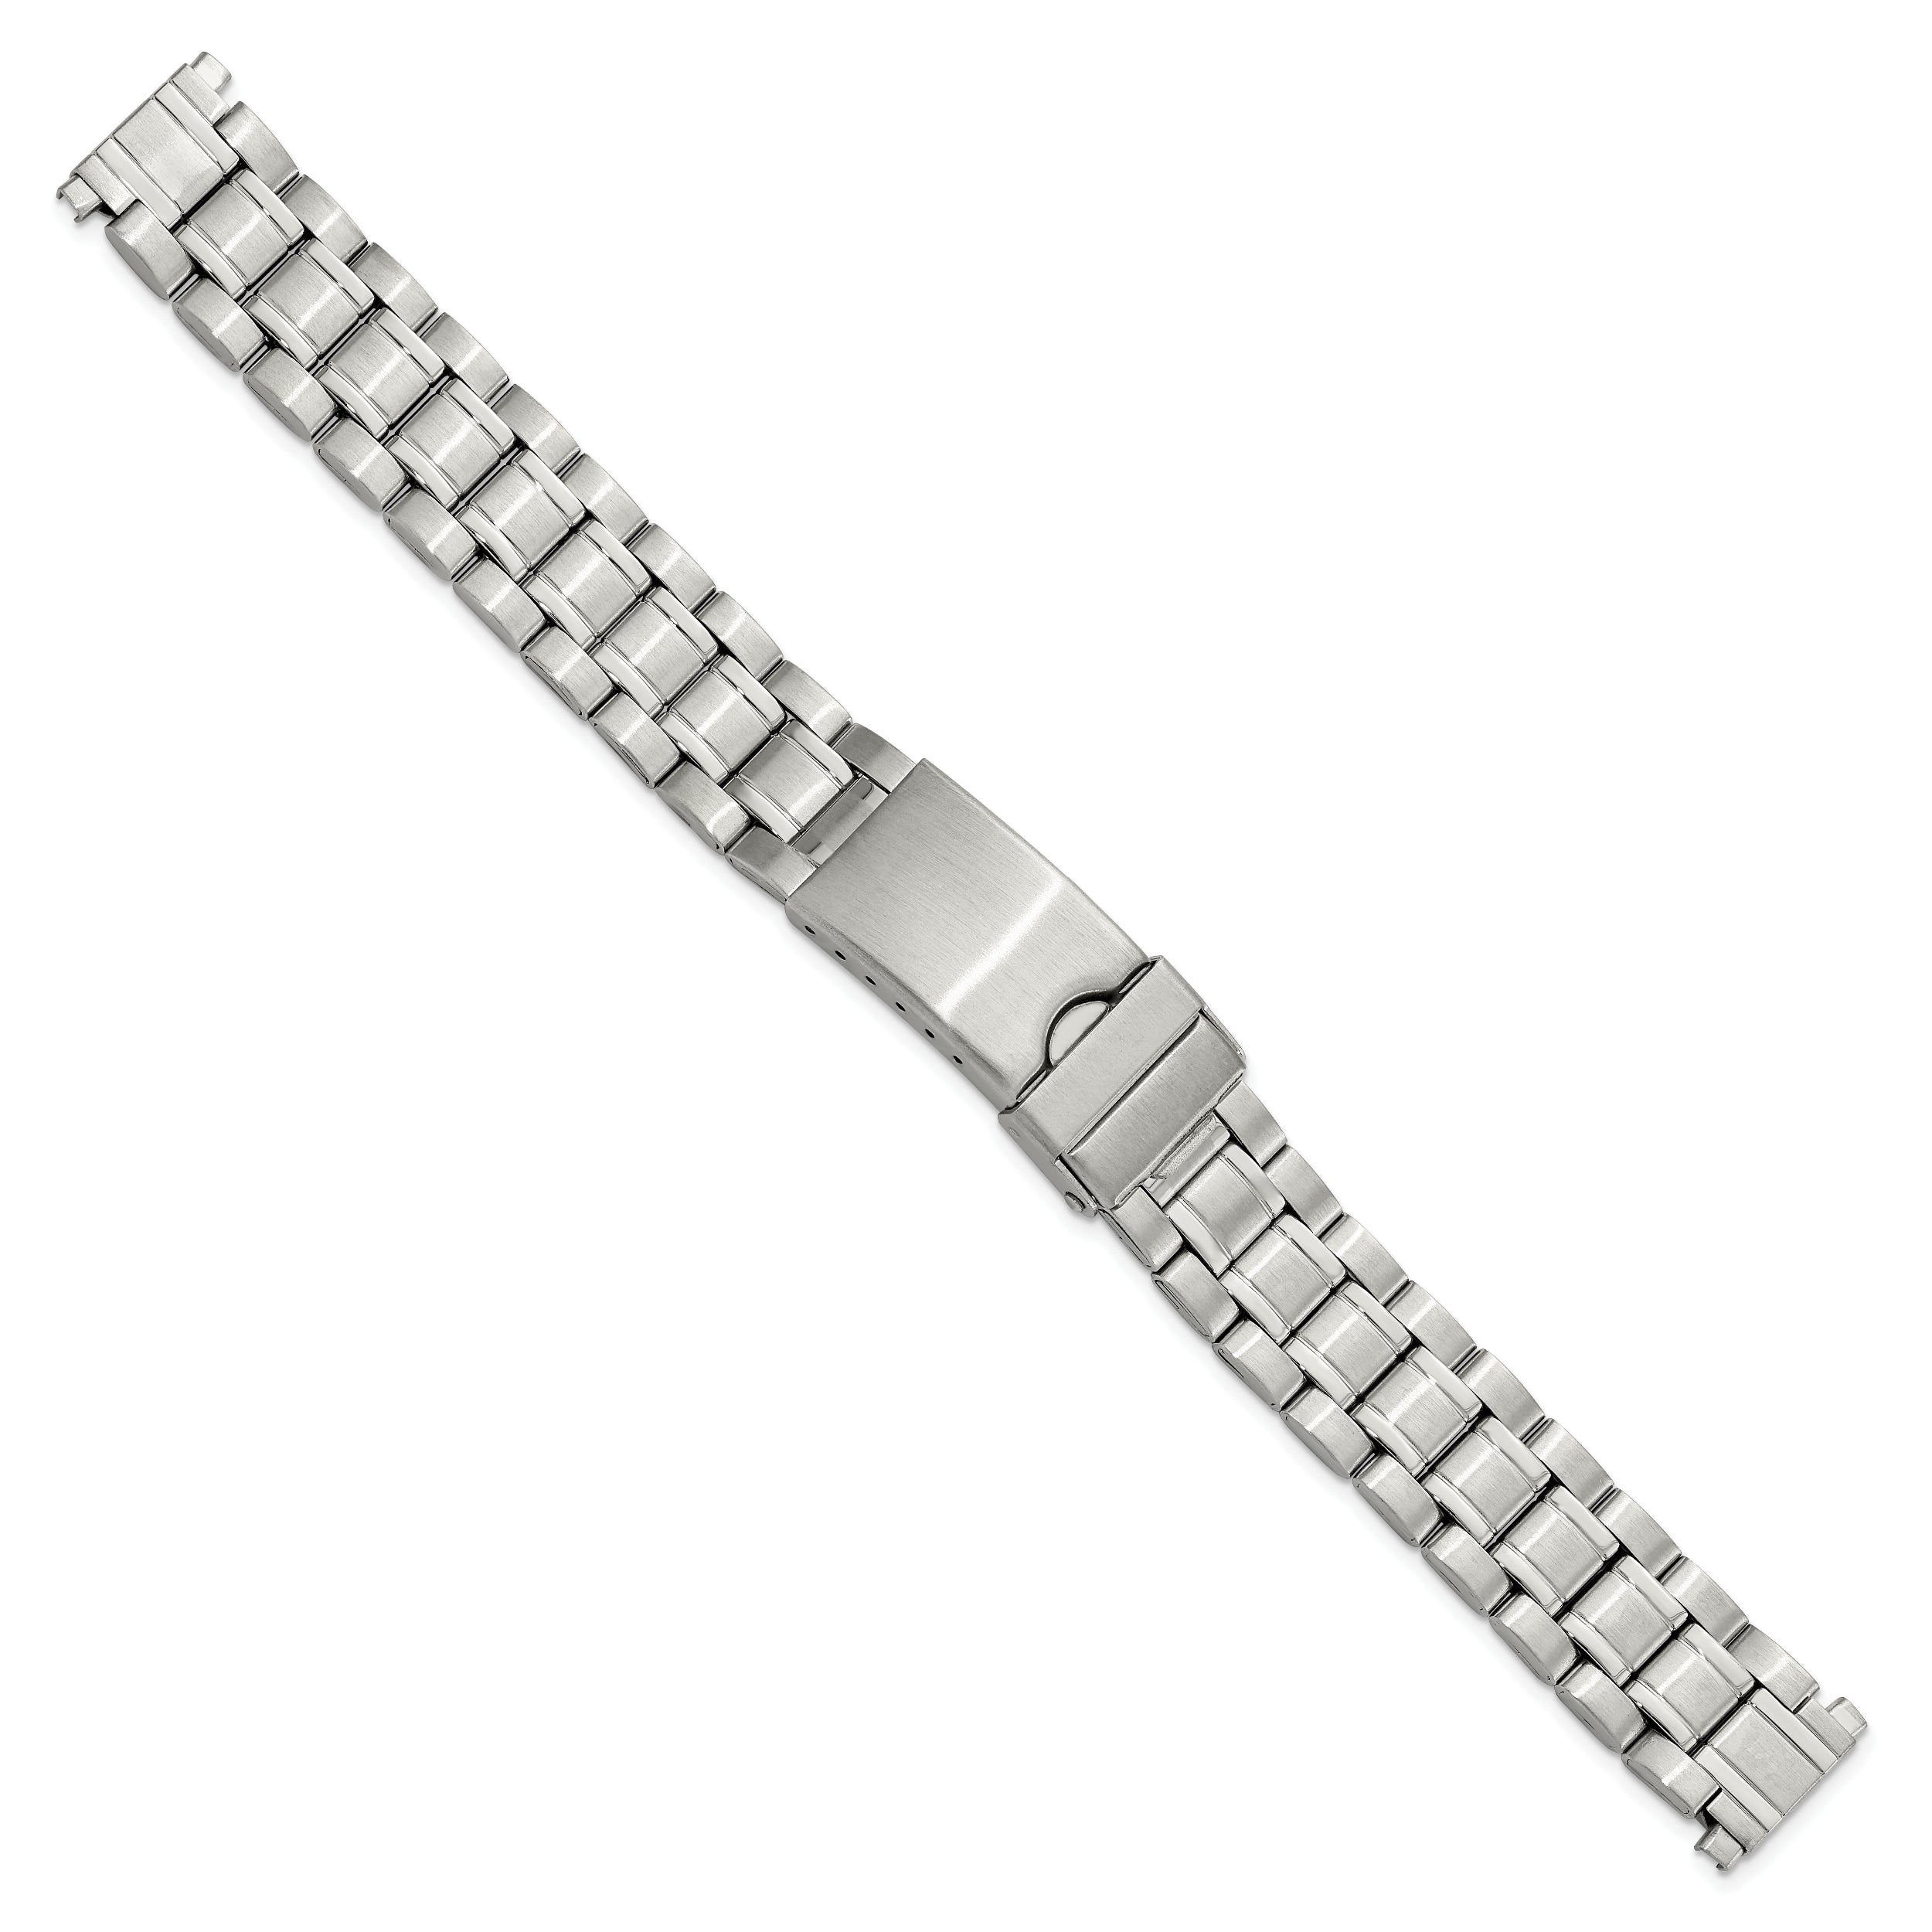 12-16mm Ladies Satin and Polished Stainless Steel Oyster-Style with Deployment Buckle 7 inch Watch Band